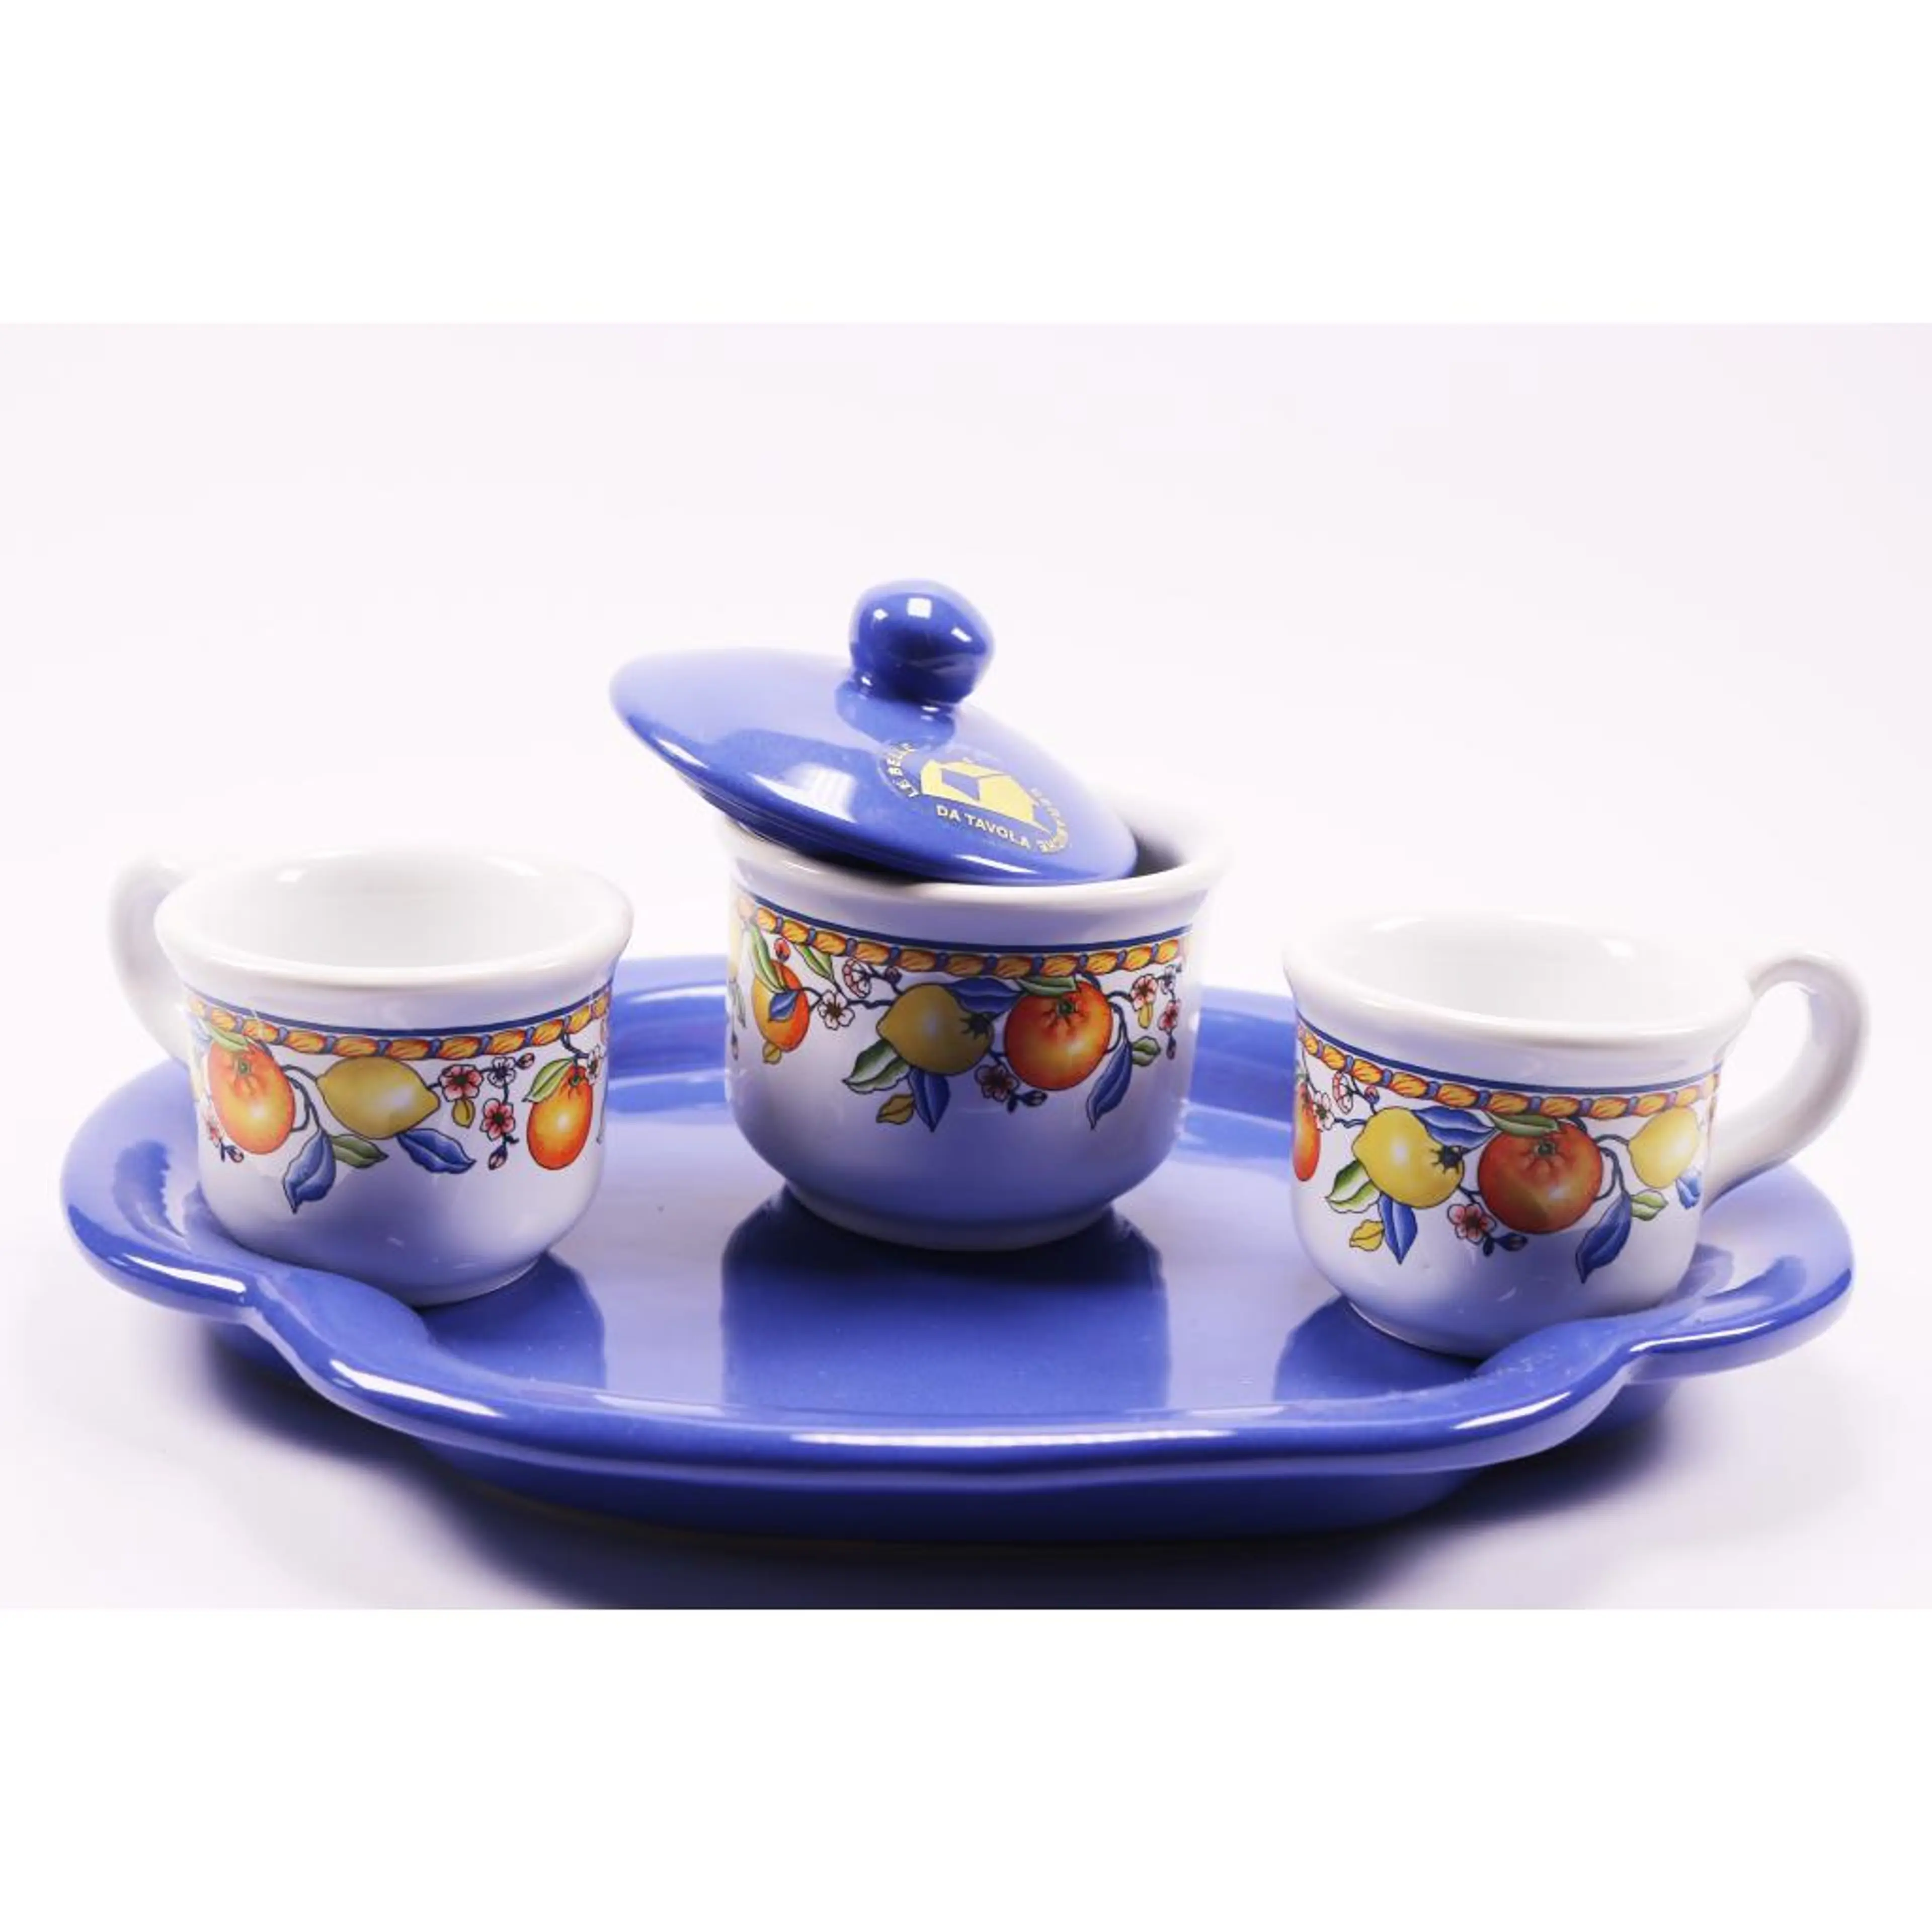 Set Of Coffee Cups With Tray Blue Border, Lemons And Oranges